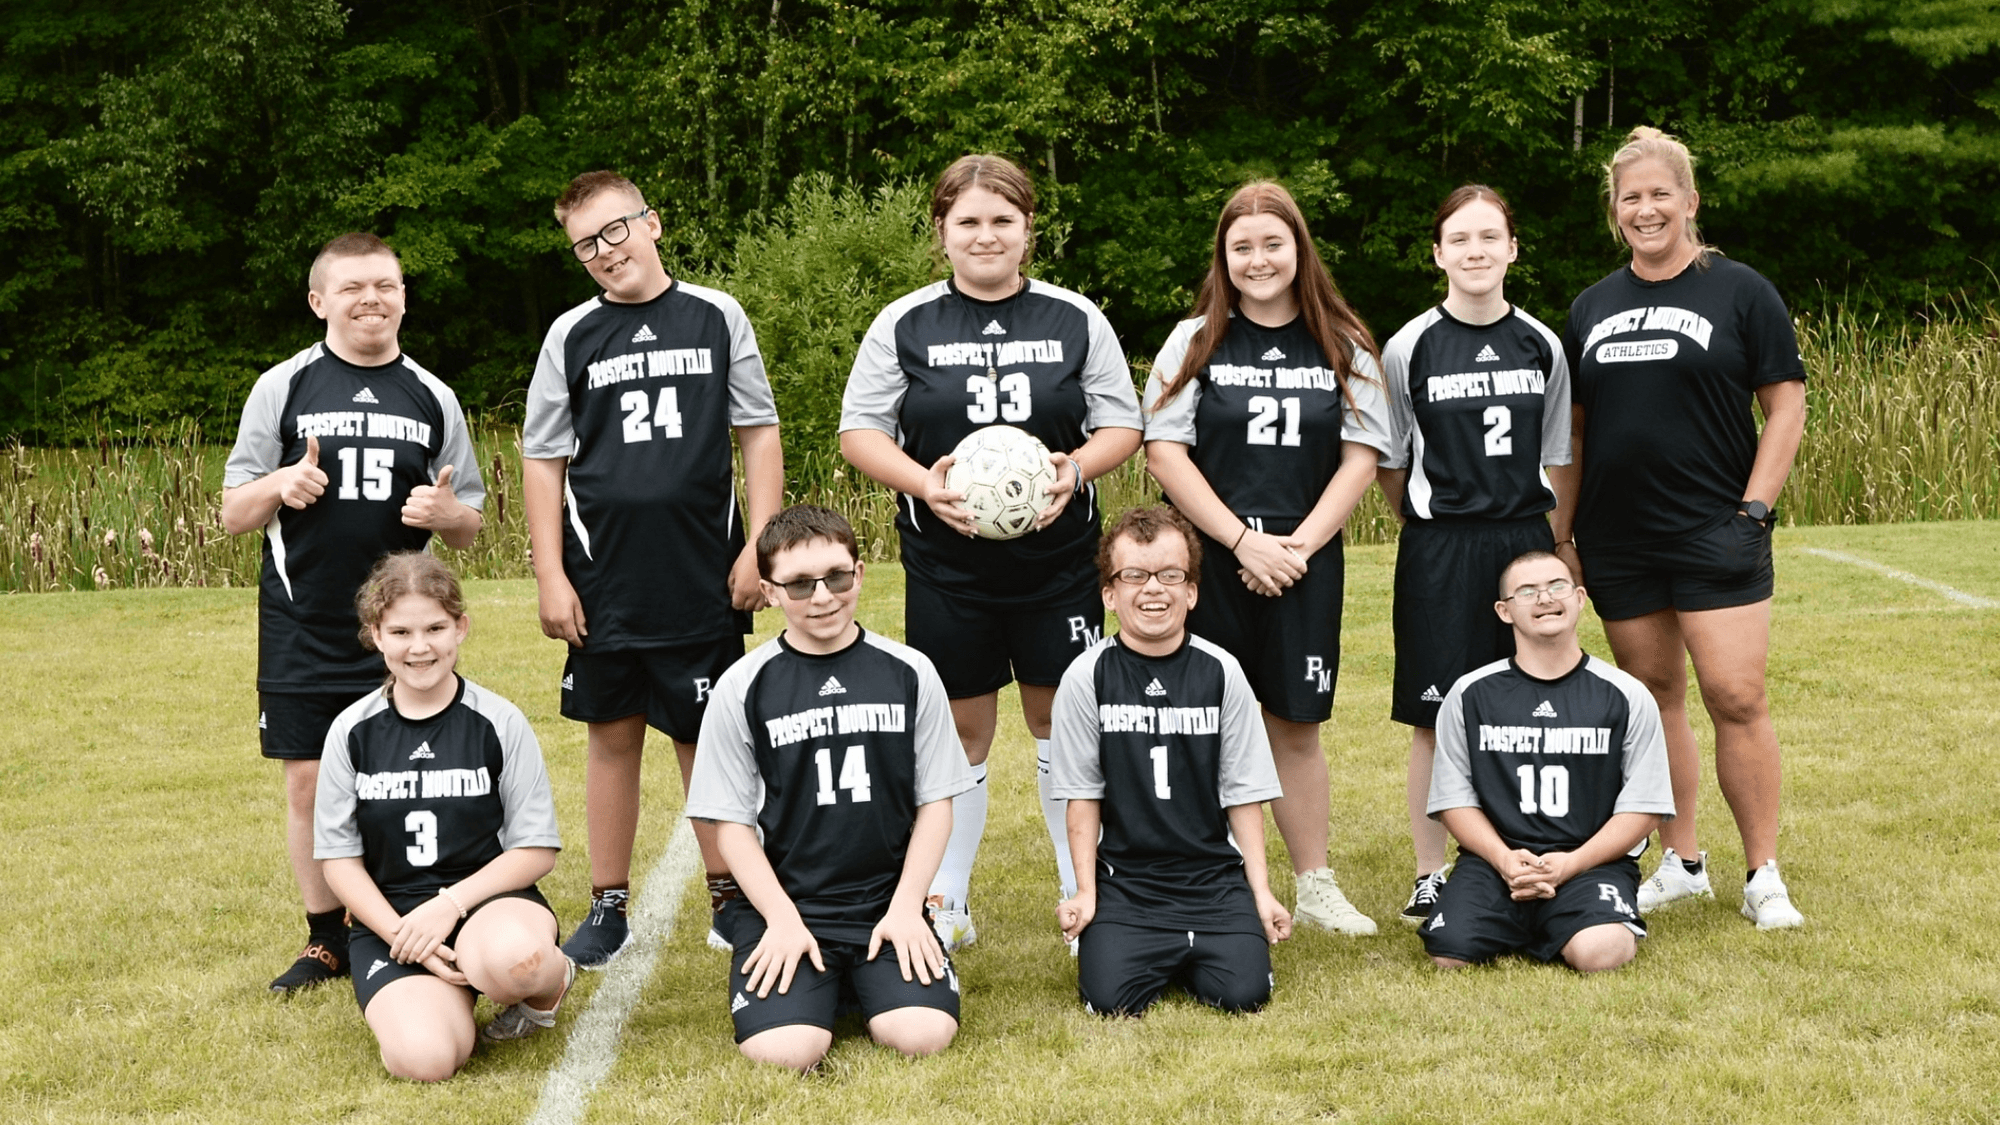 PMHS Unified Soccer